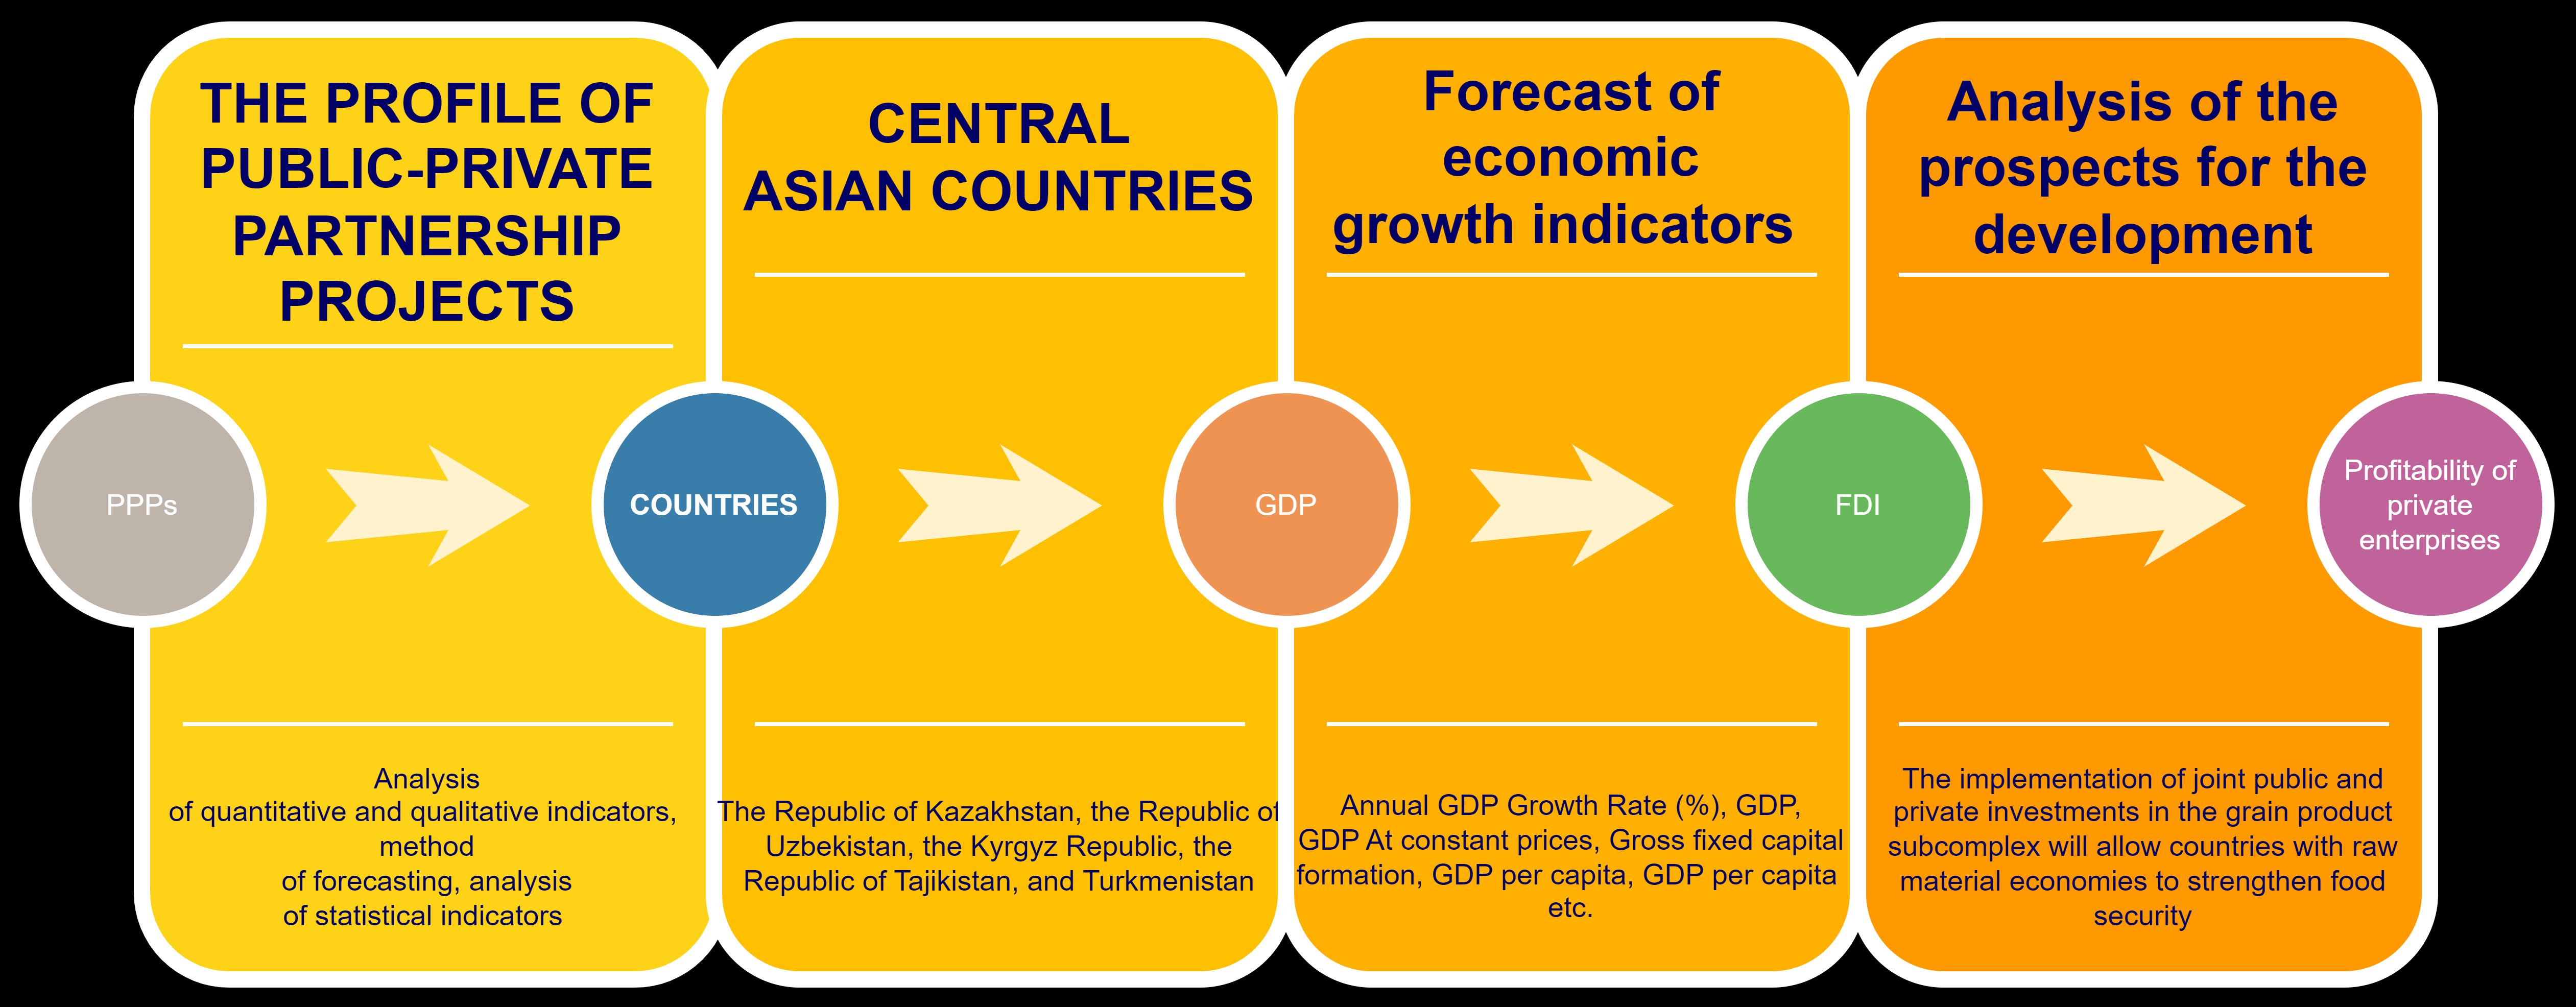 Impact of the profile of public-private partnership projects on the economic potential of Central Asian countries 